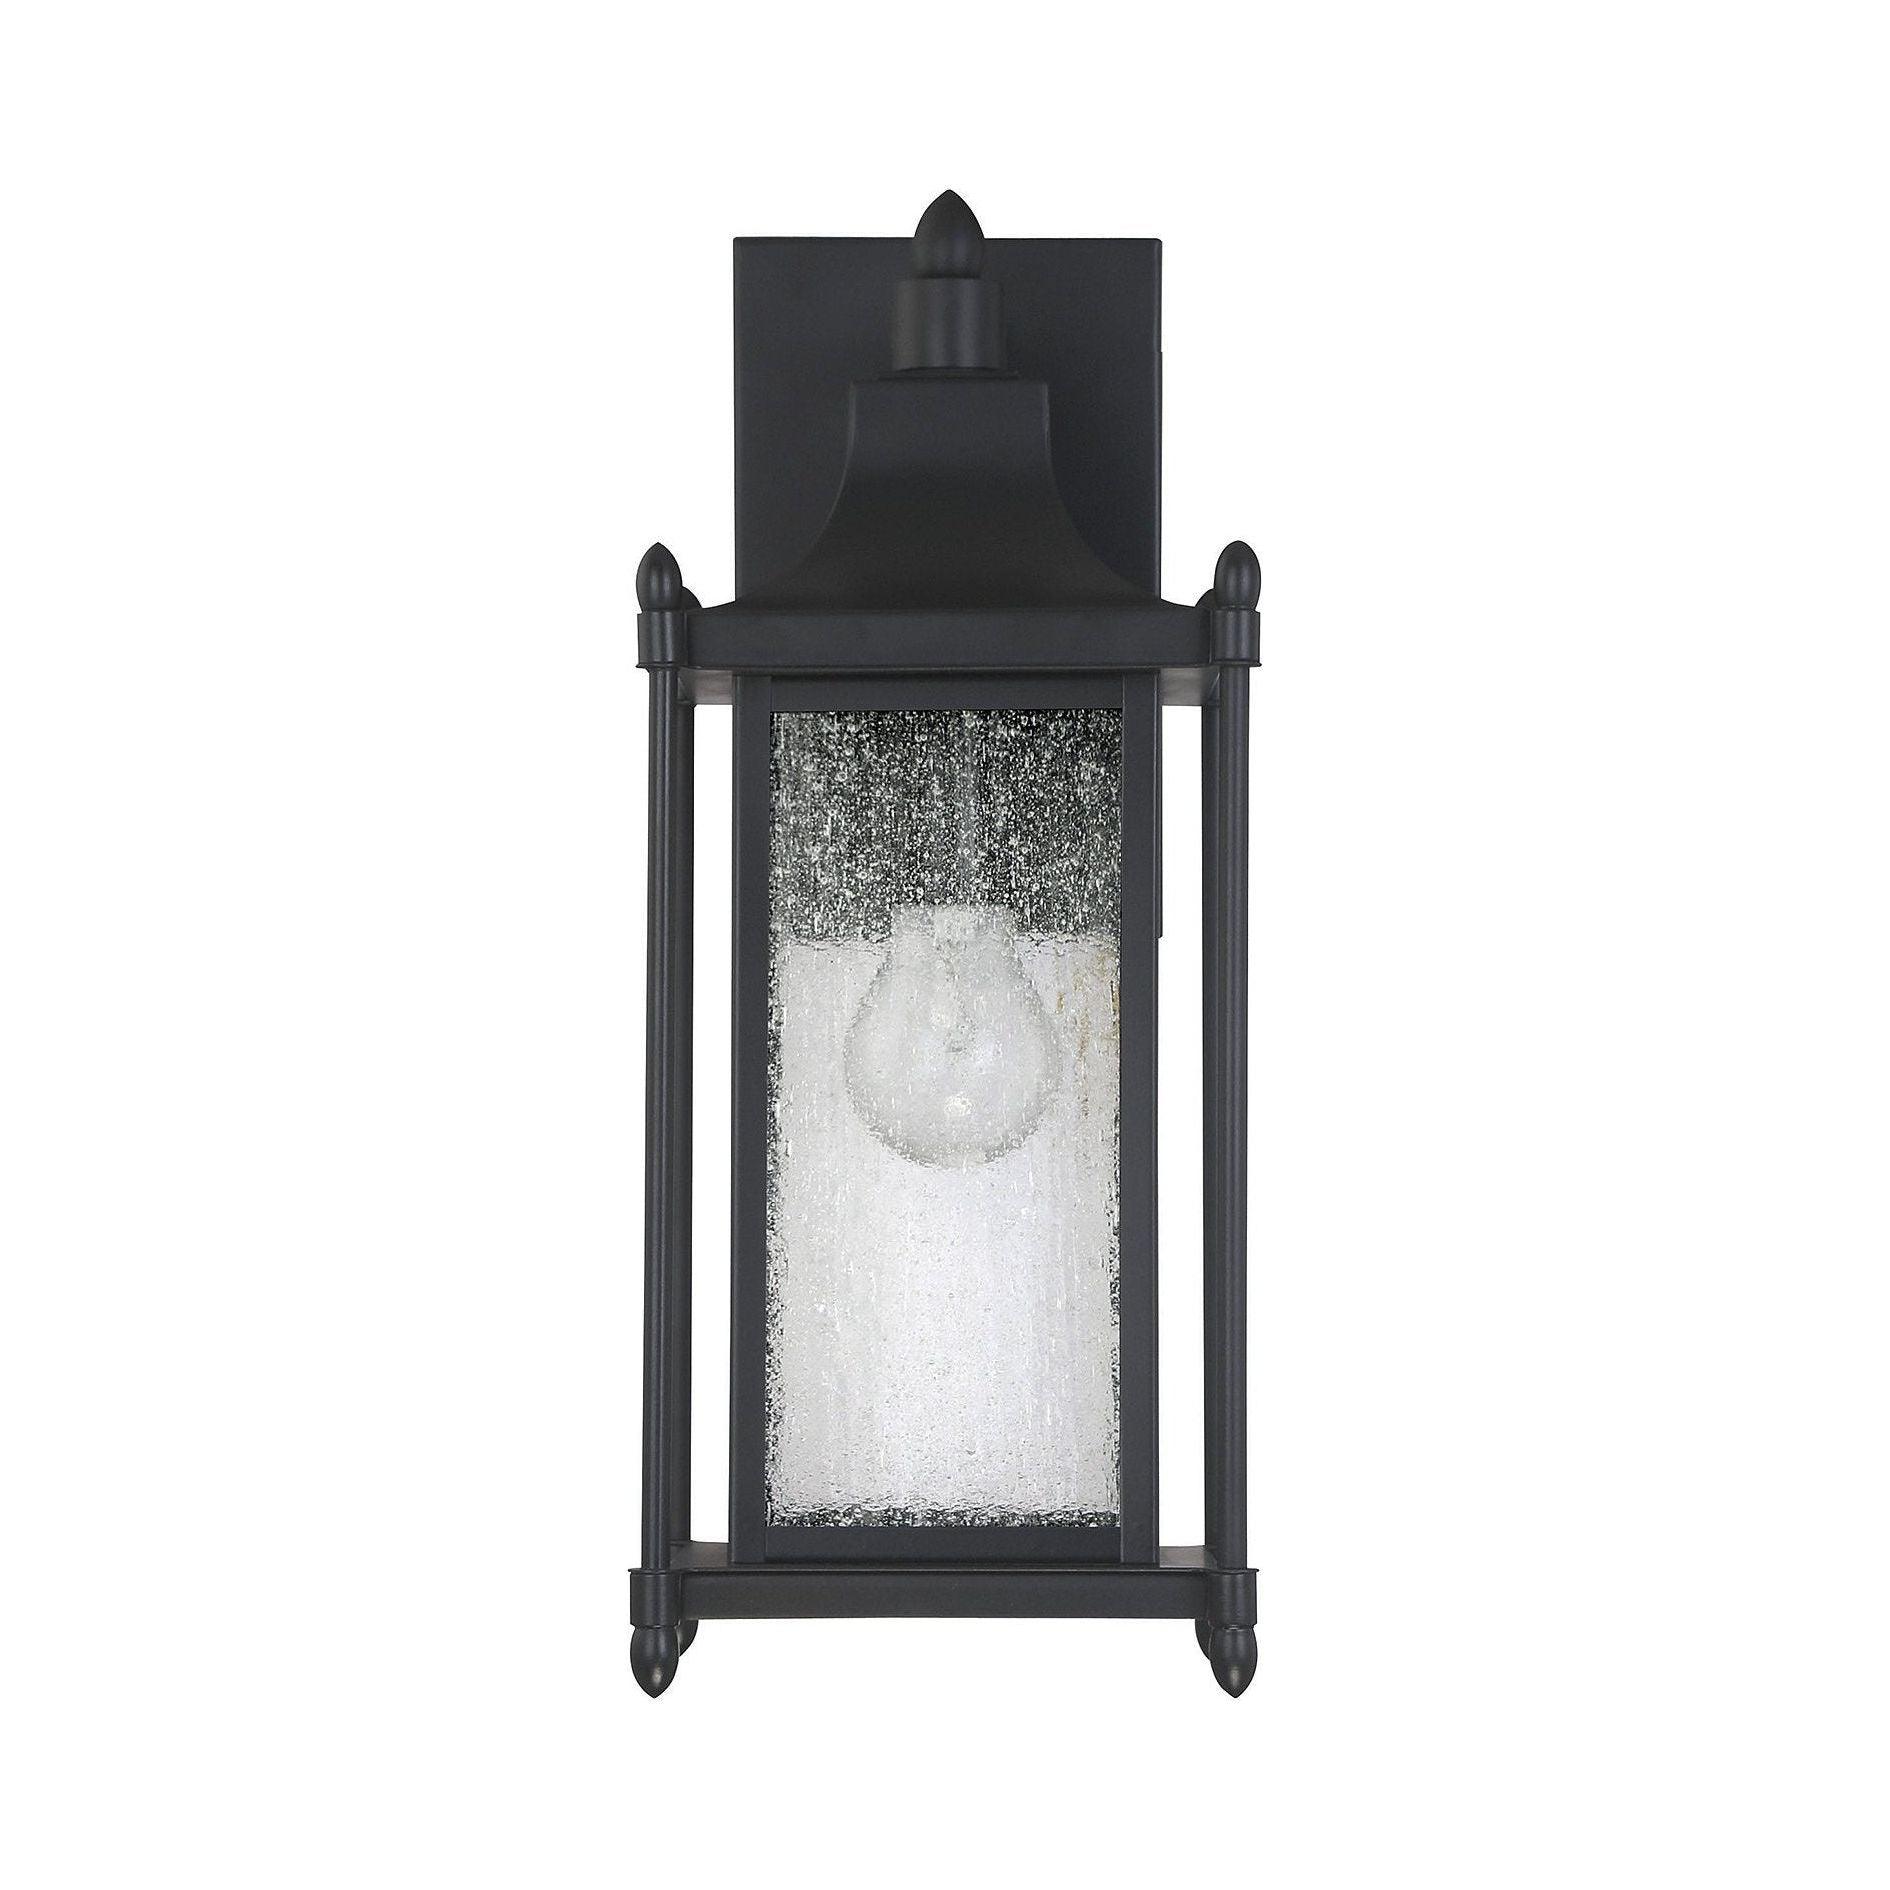 Savoy House - Dunnmore Outdoor Wall Light - Lights Canada